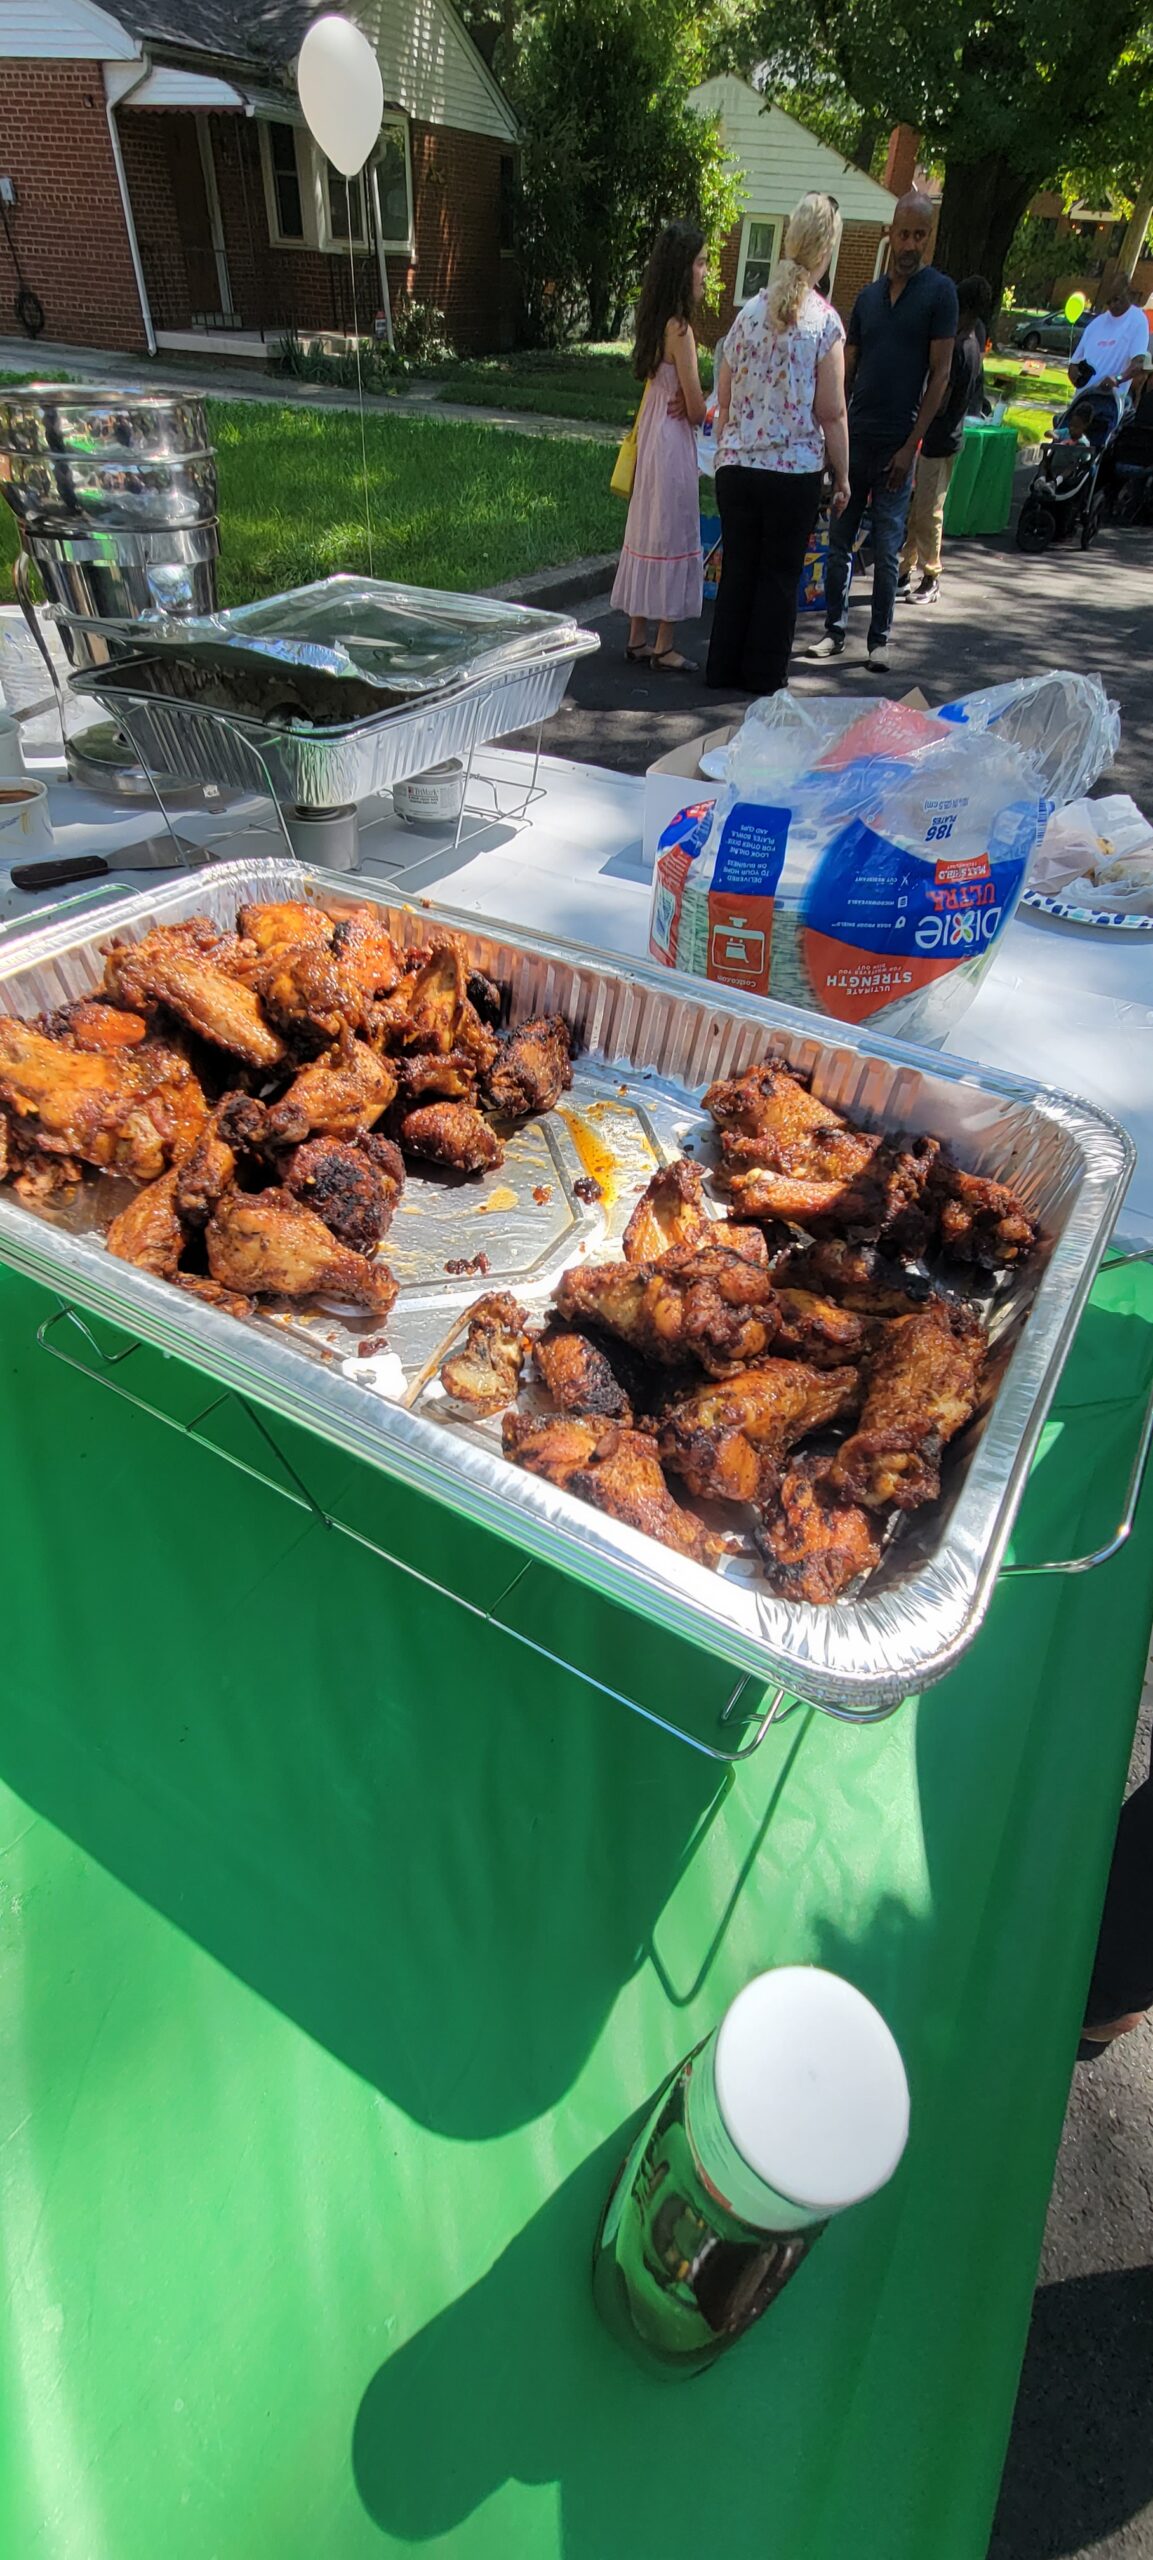 Food from Highlands Cafe and Grill at Penn Branch Community Day and Block Party 2023